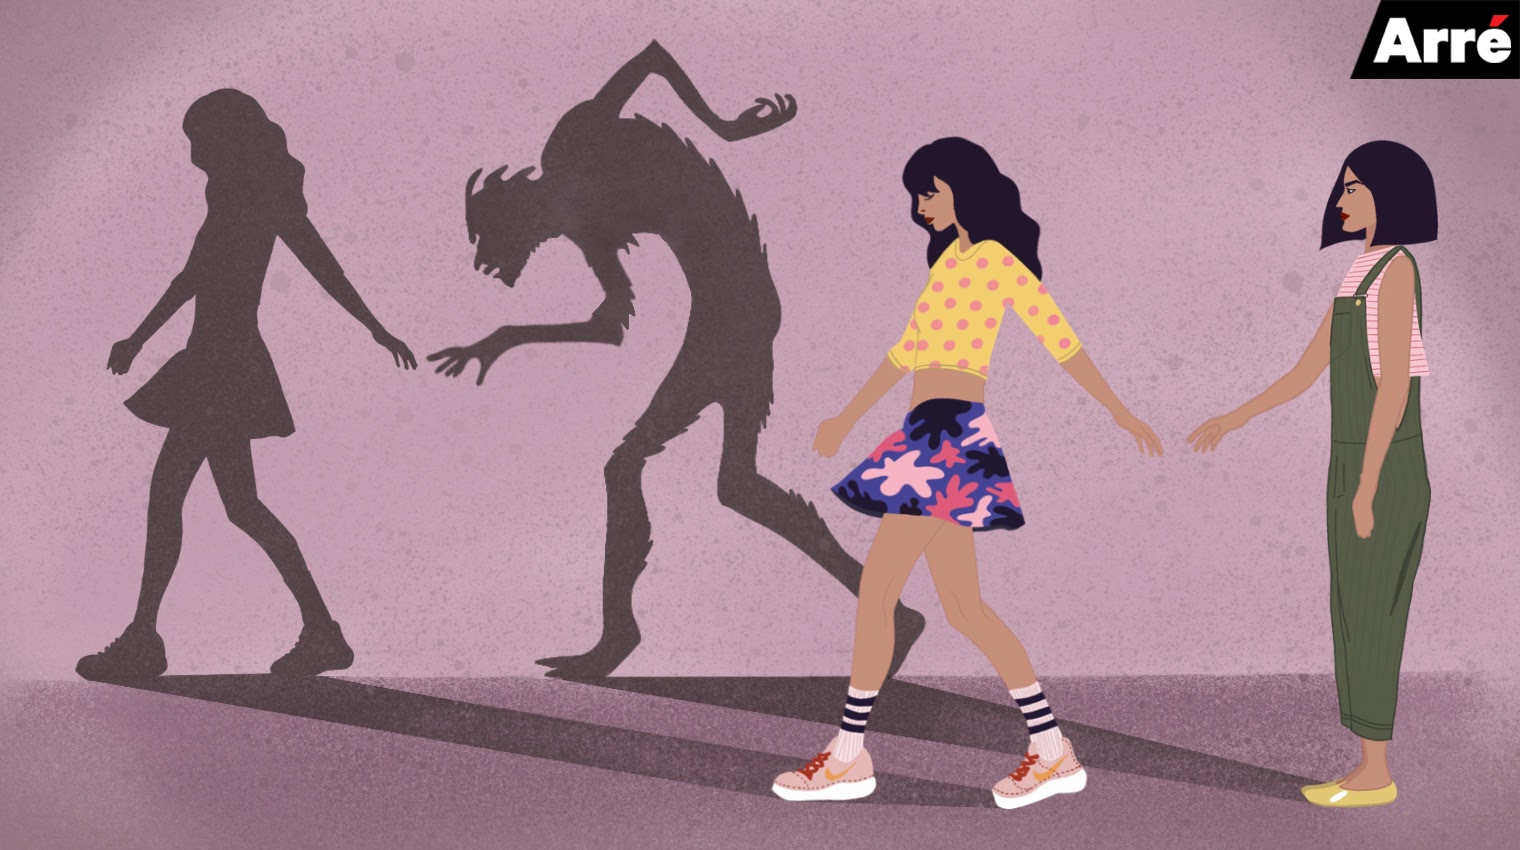 A graphic showing what appears to be two friends walking side by side. Their shadows show that one friend is actually a monster.